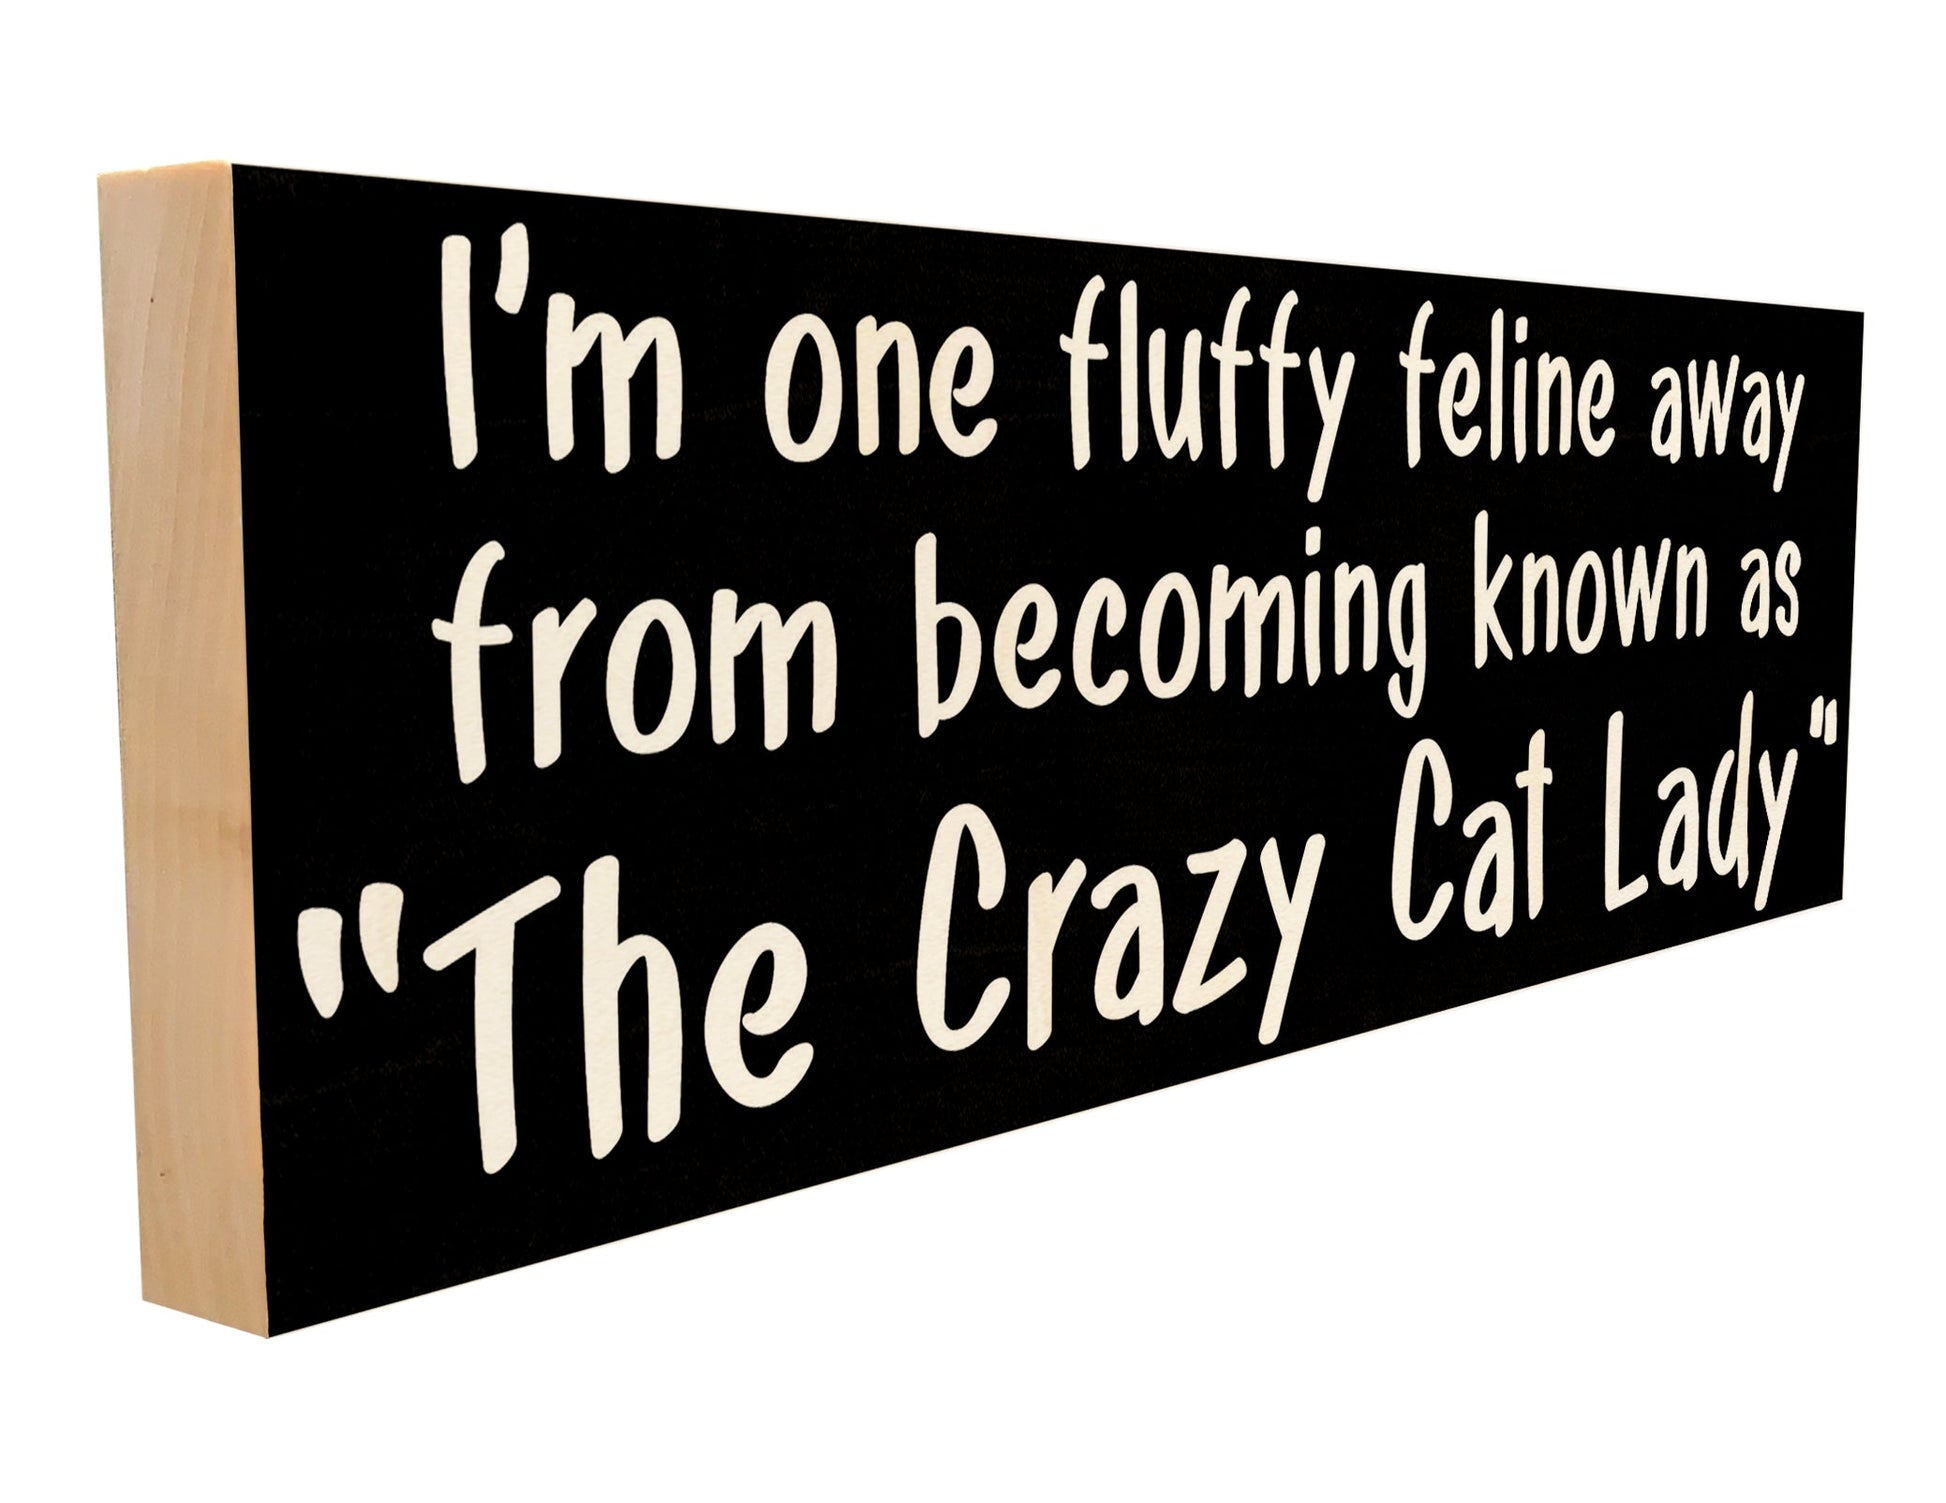 The Crazy Cat Lady.